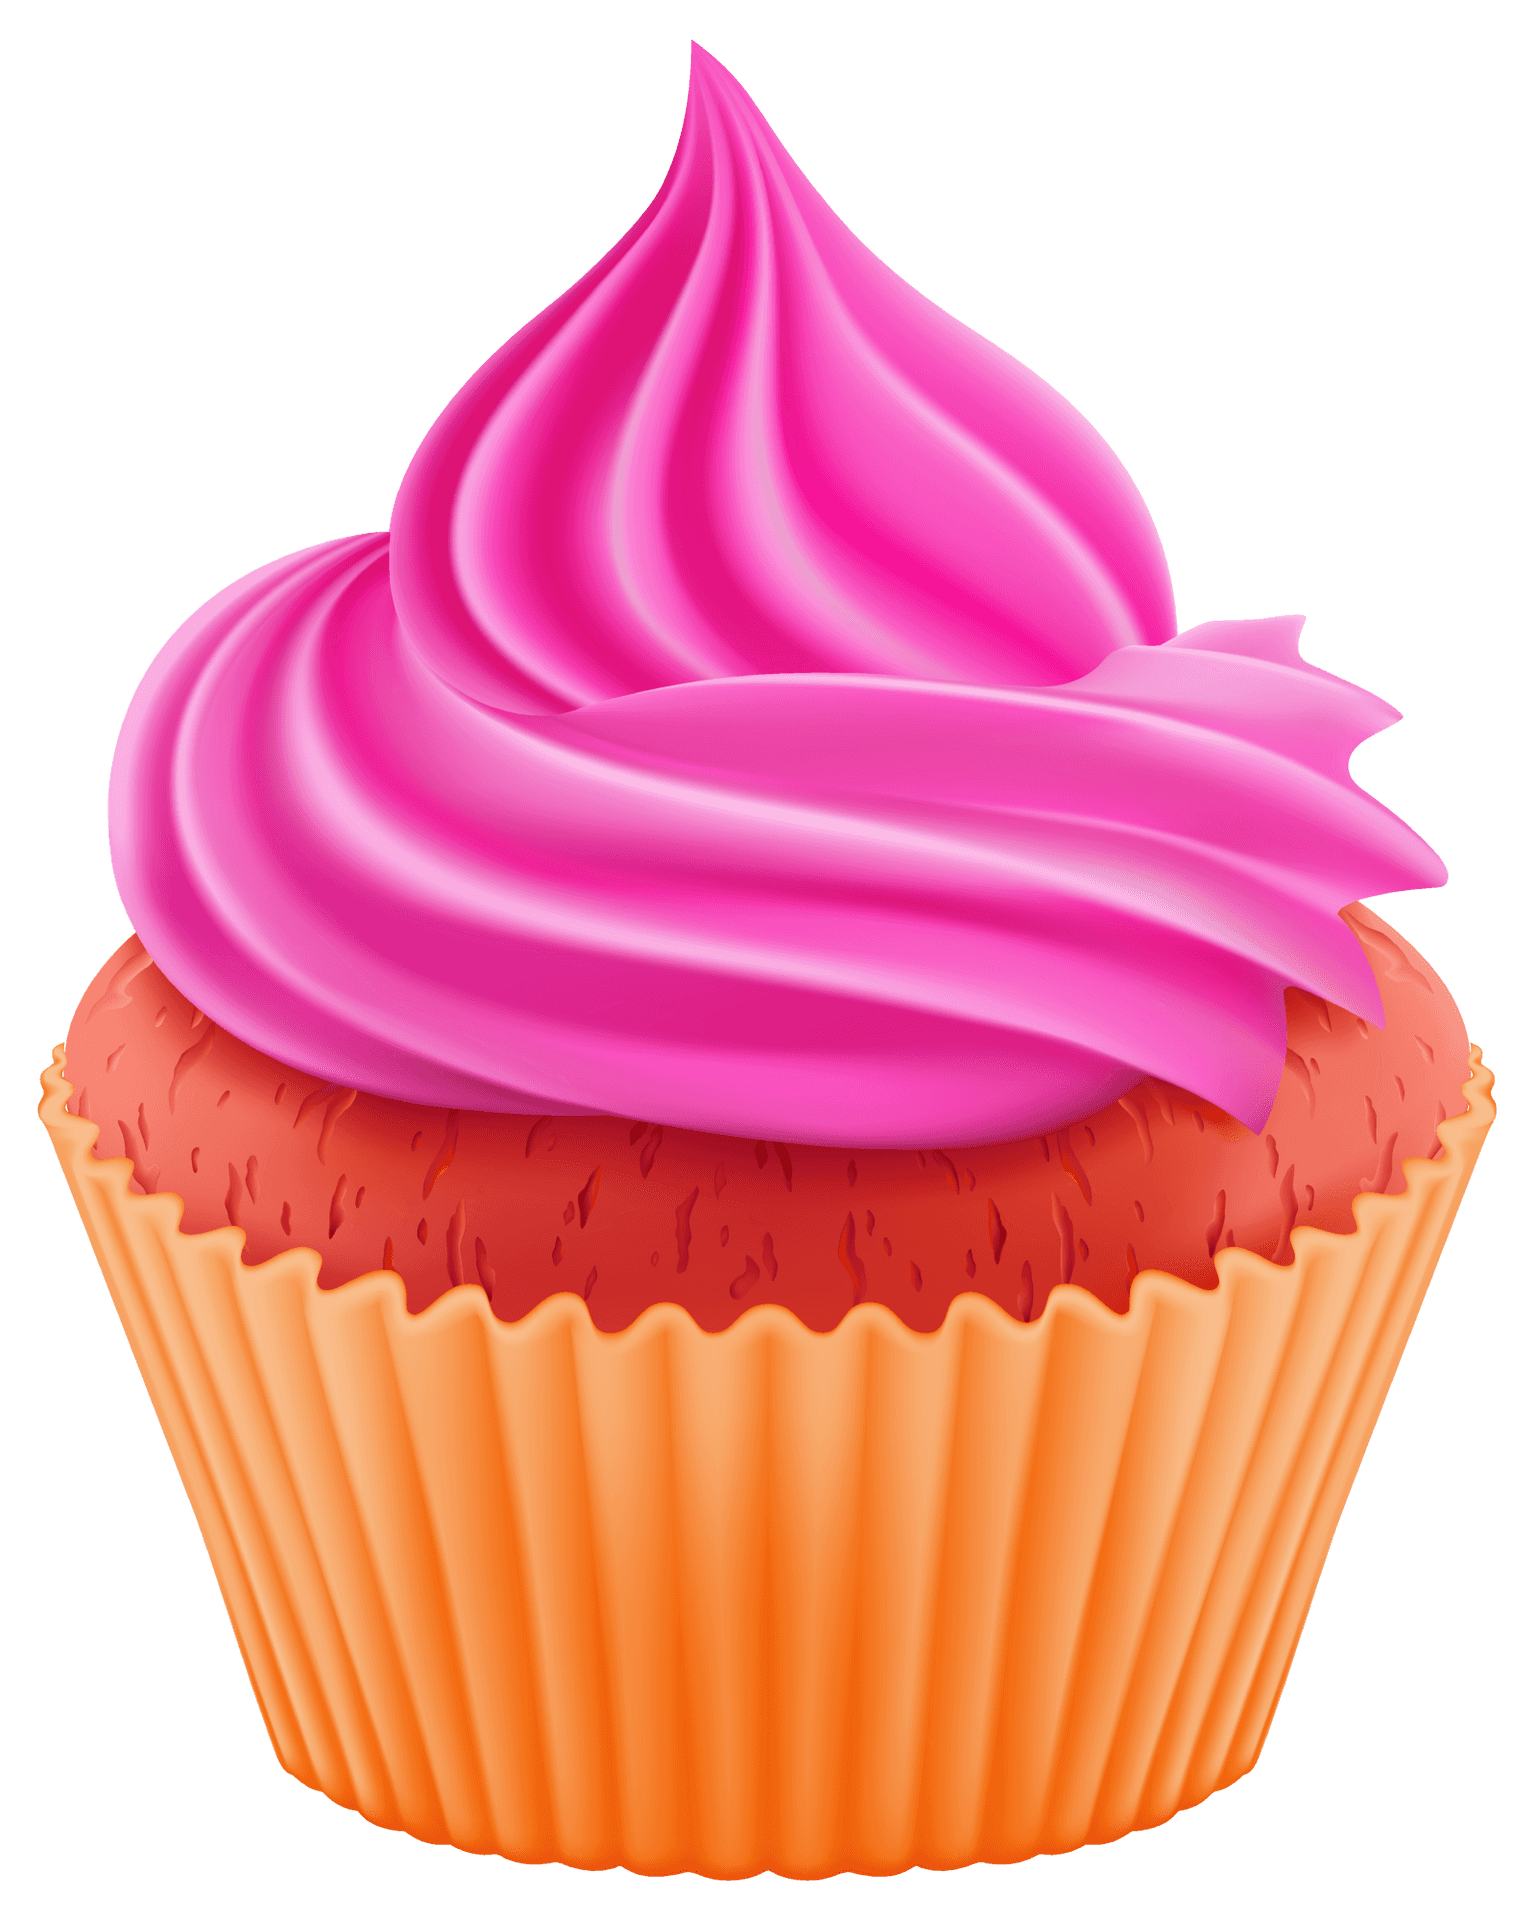 Pink Frosted Cupcake Illustration PNG image